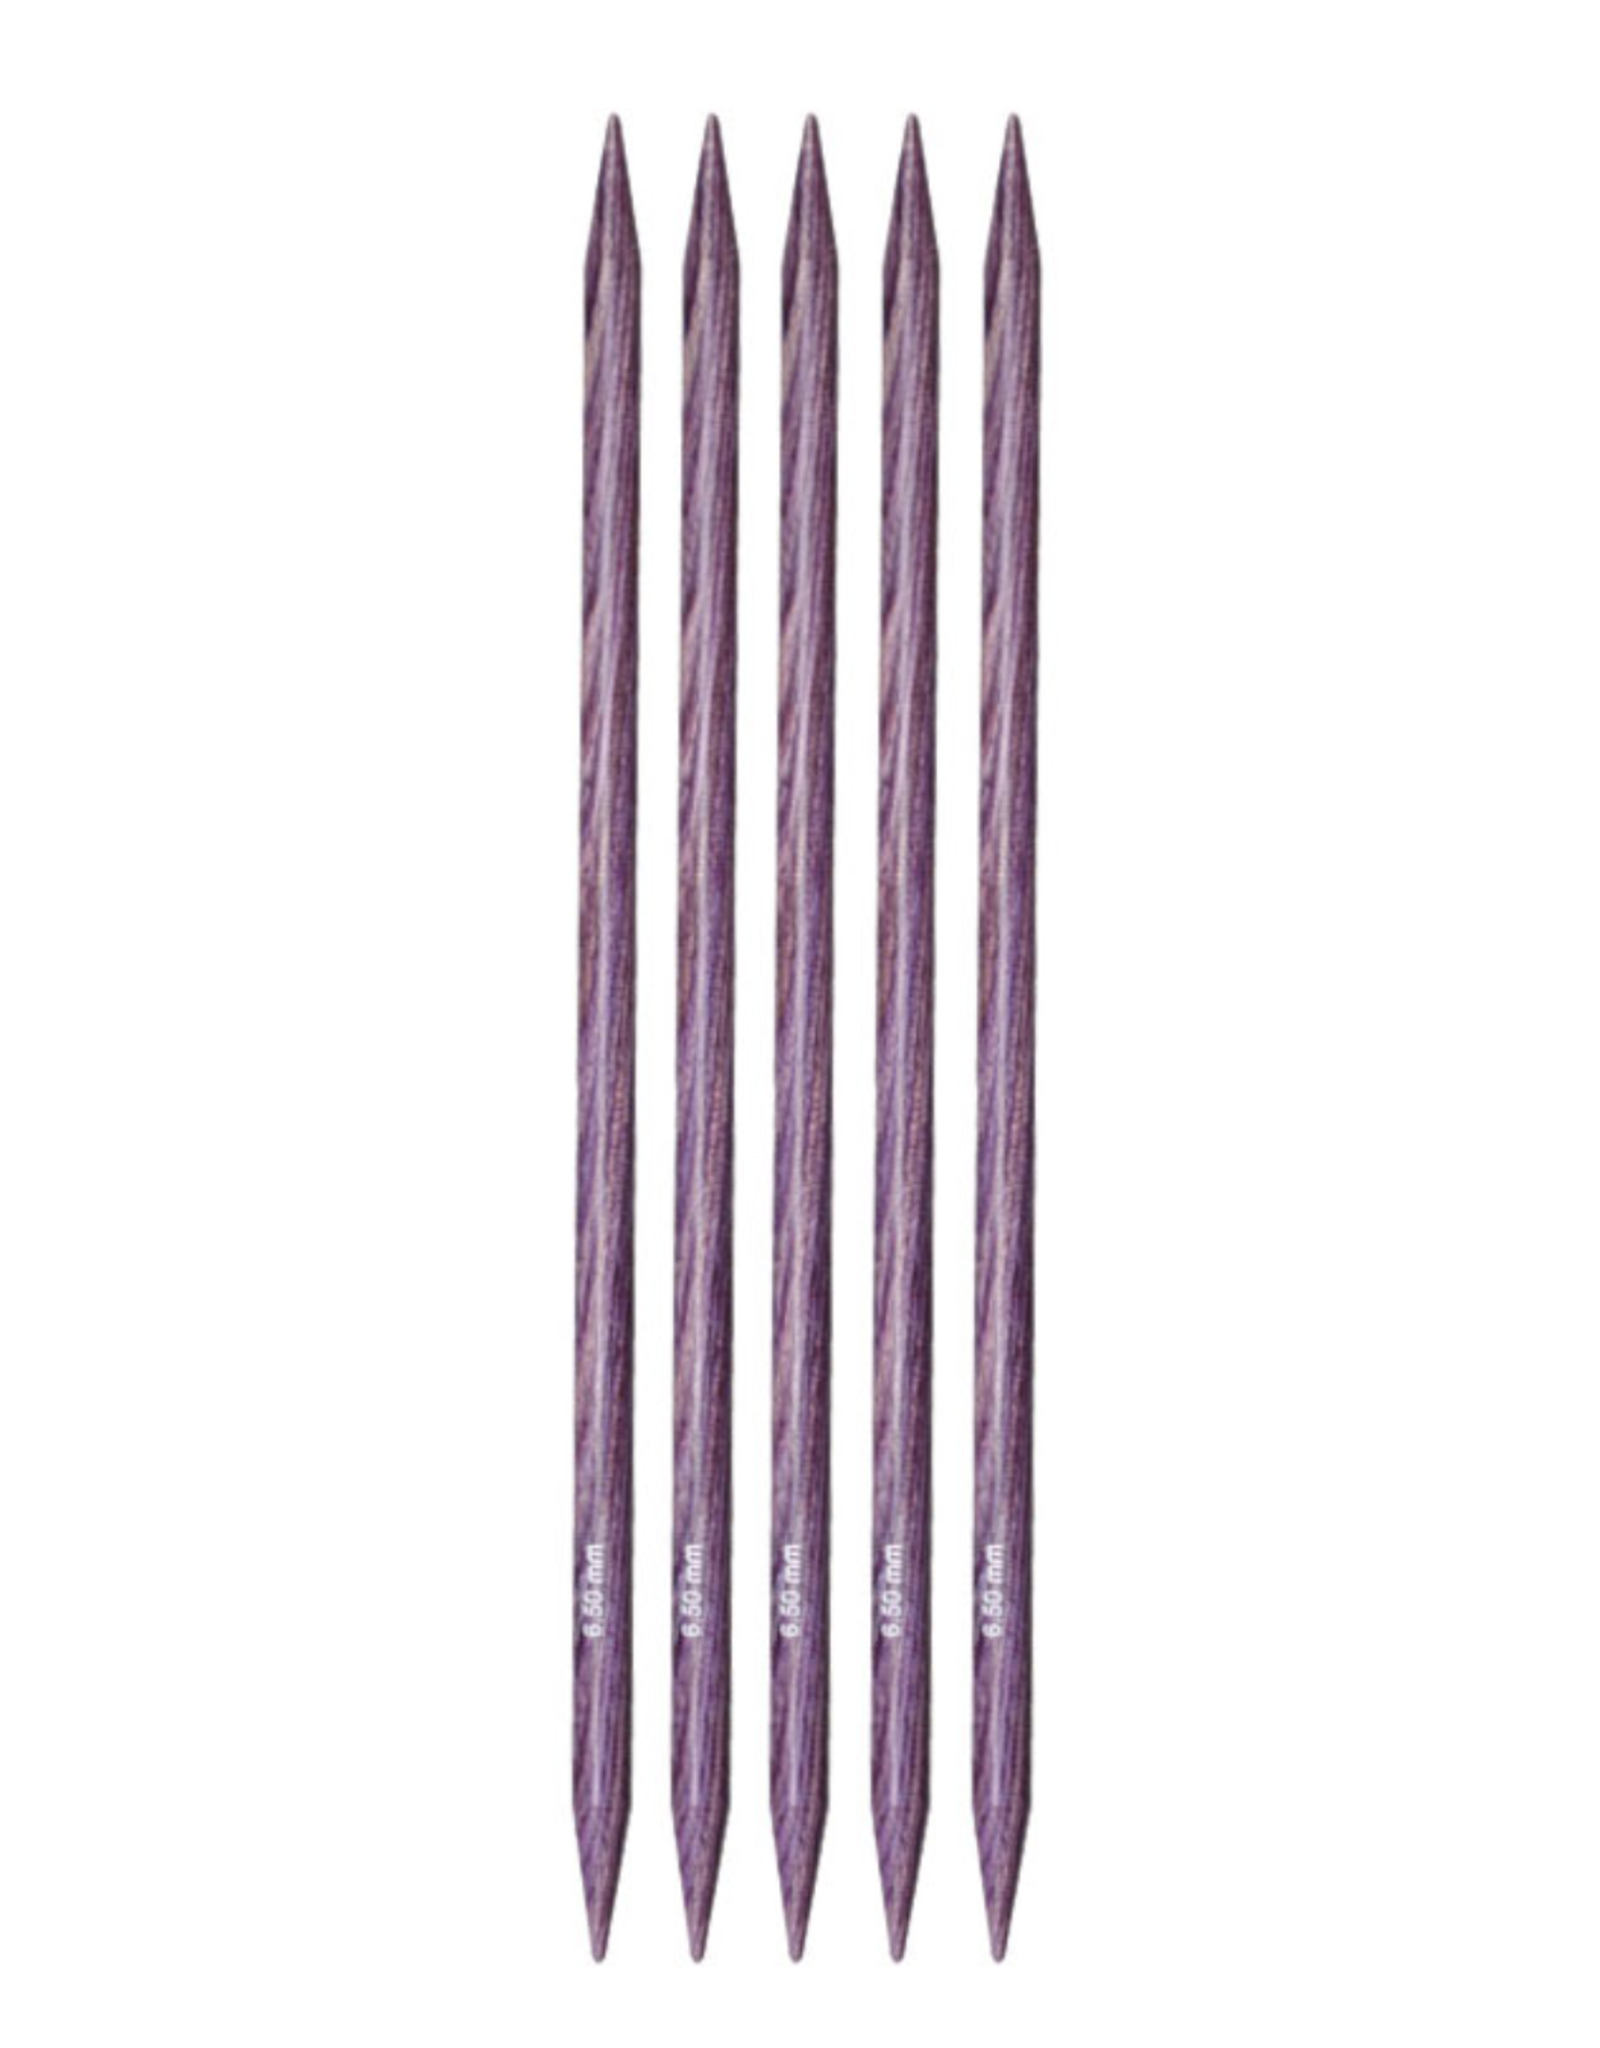 Dreamz 5" long double pointed needle, size US 10.5